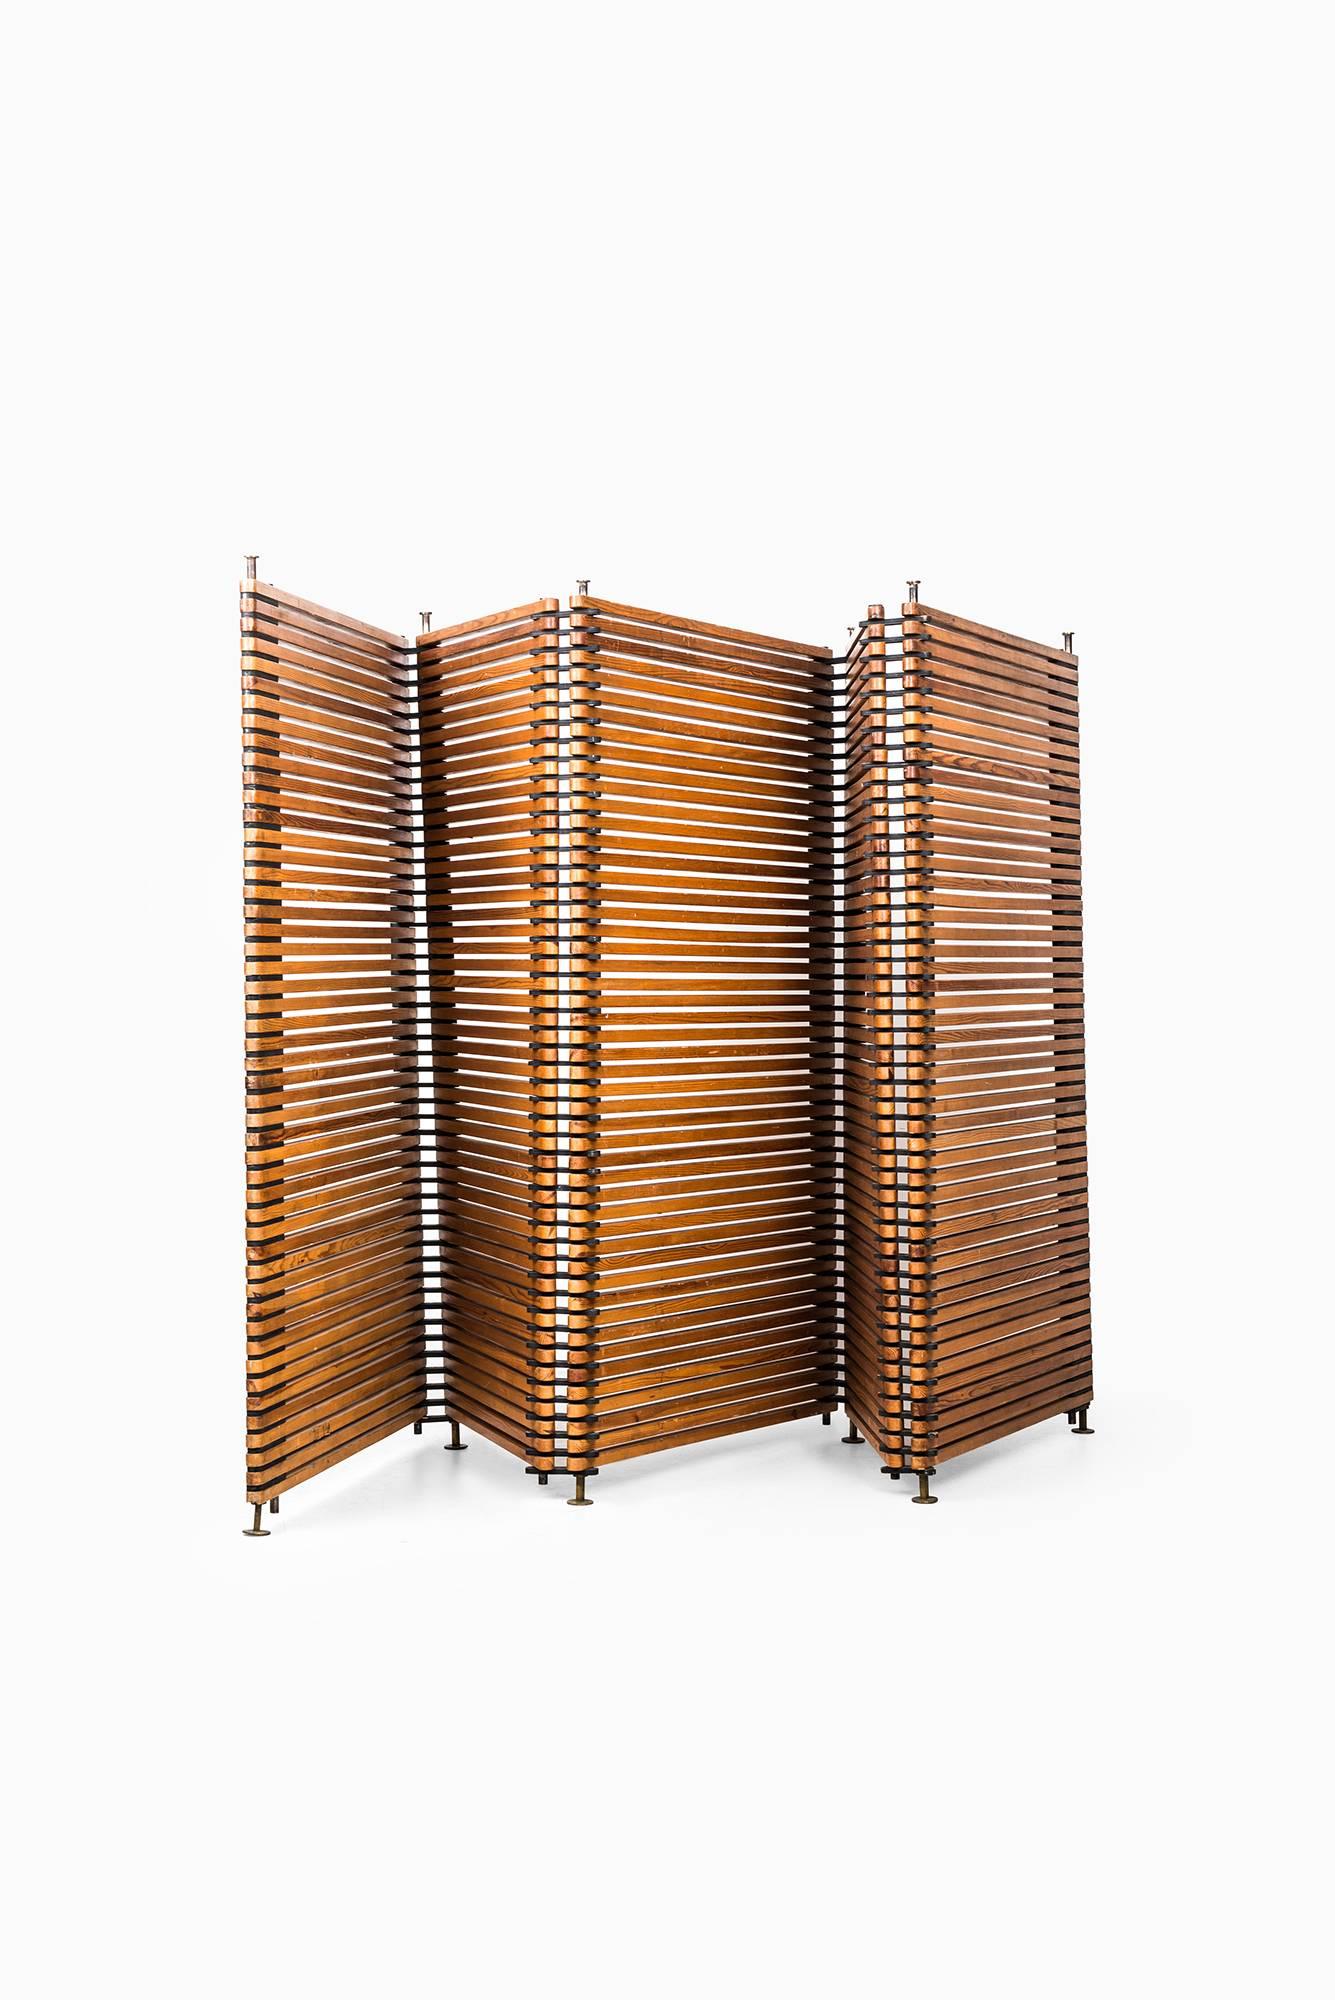 Mid-20th Century Large and Unique Room Divider in Oregon Pine Produced in Finland